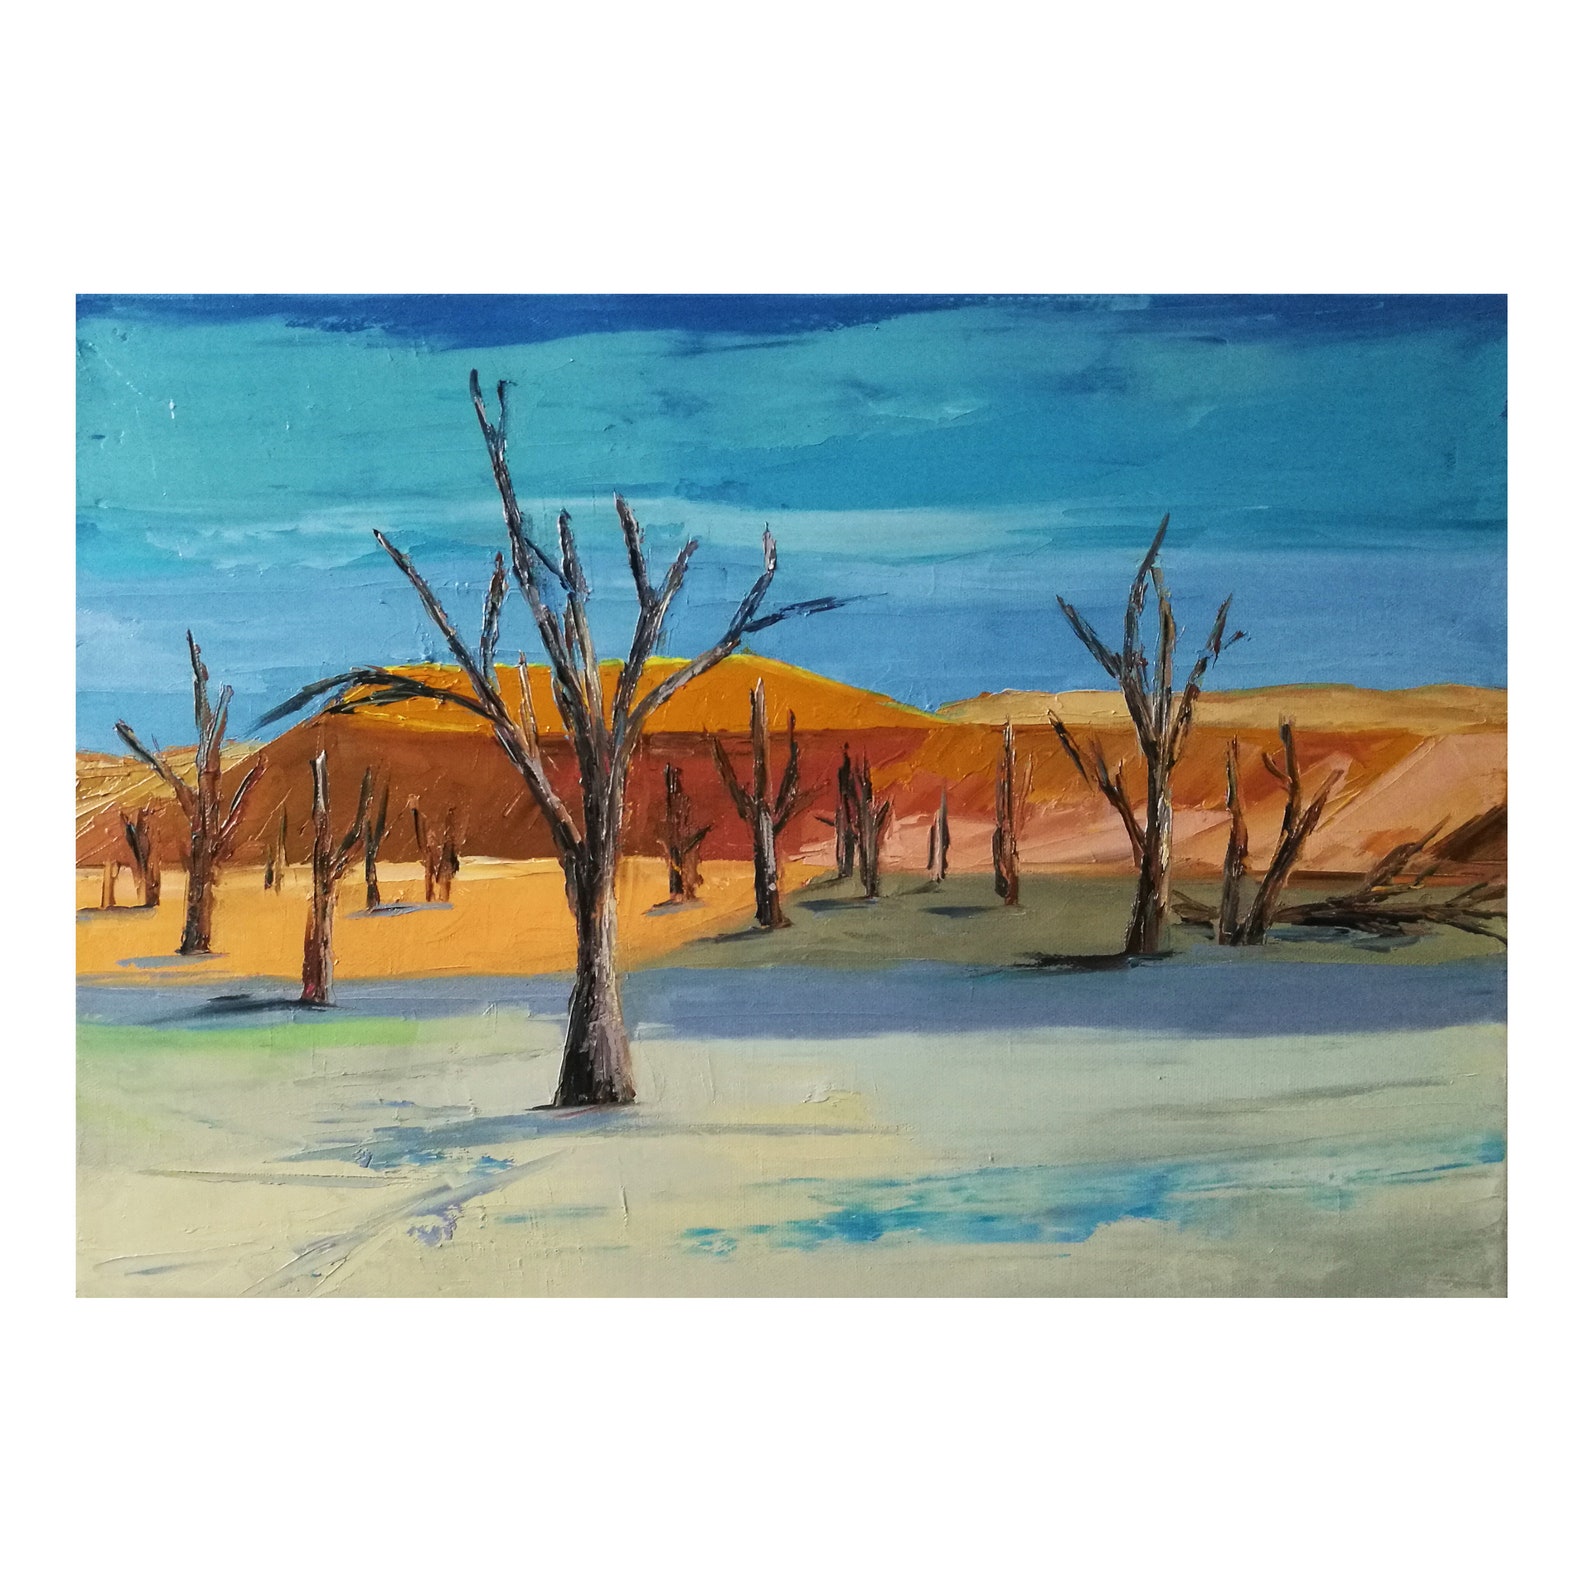 Albums 93+ Images is the namib desert picture a painting Excellent